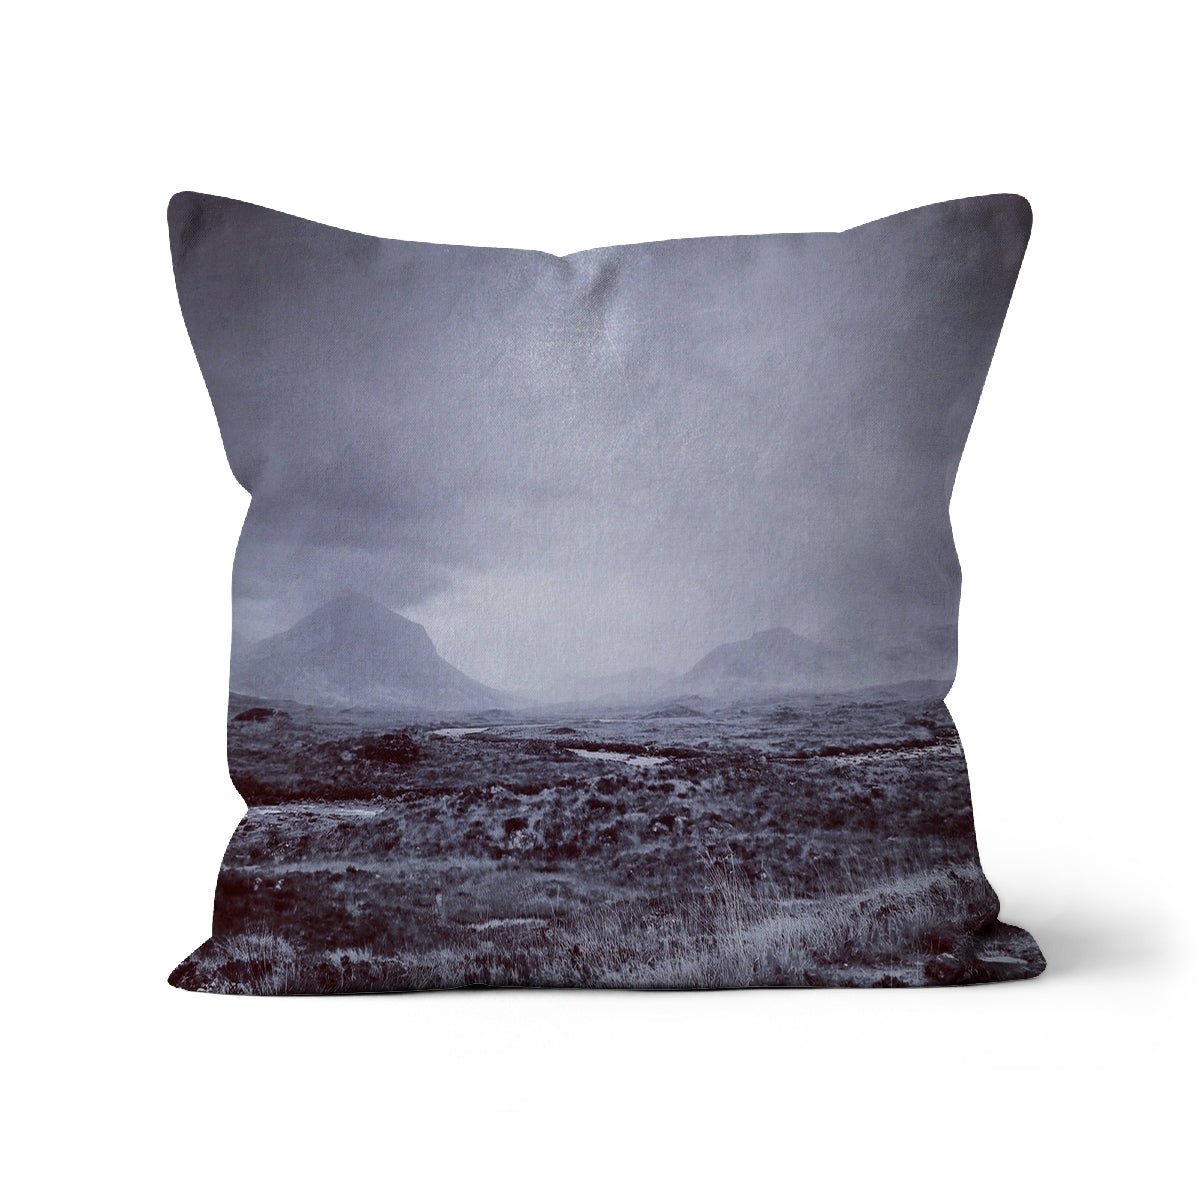 The Brooding Cuillin Skye Art Gifts Cushion-Cushions-Skye Art Gallery-Faux Suede-24"x24"-Paintings, Prints, Homeware, Art Gifts From Scotland By Scottish Artist Kevin Hunter